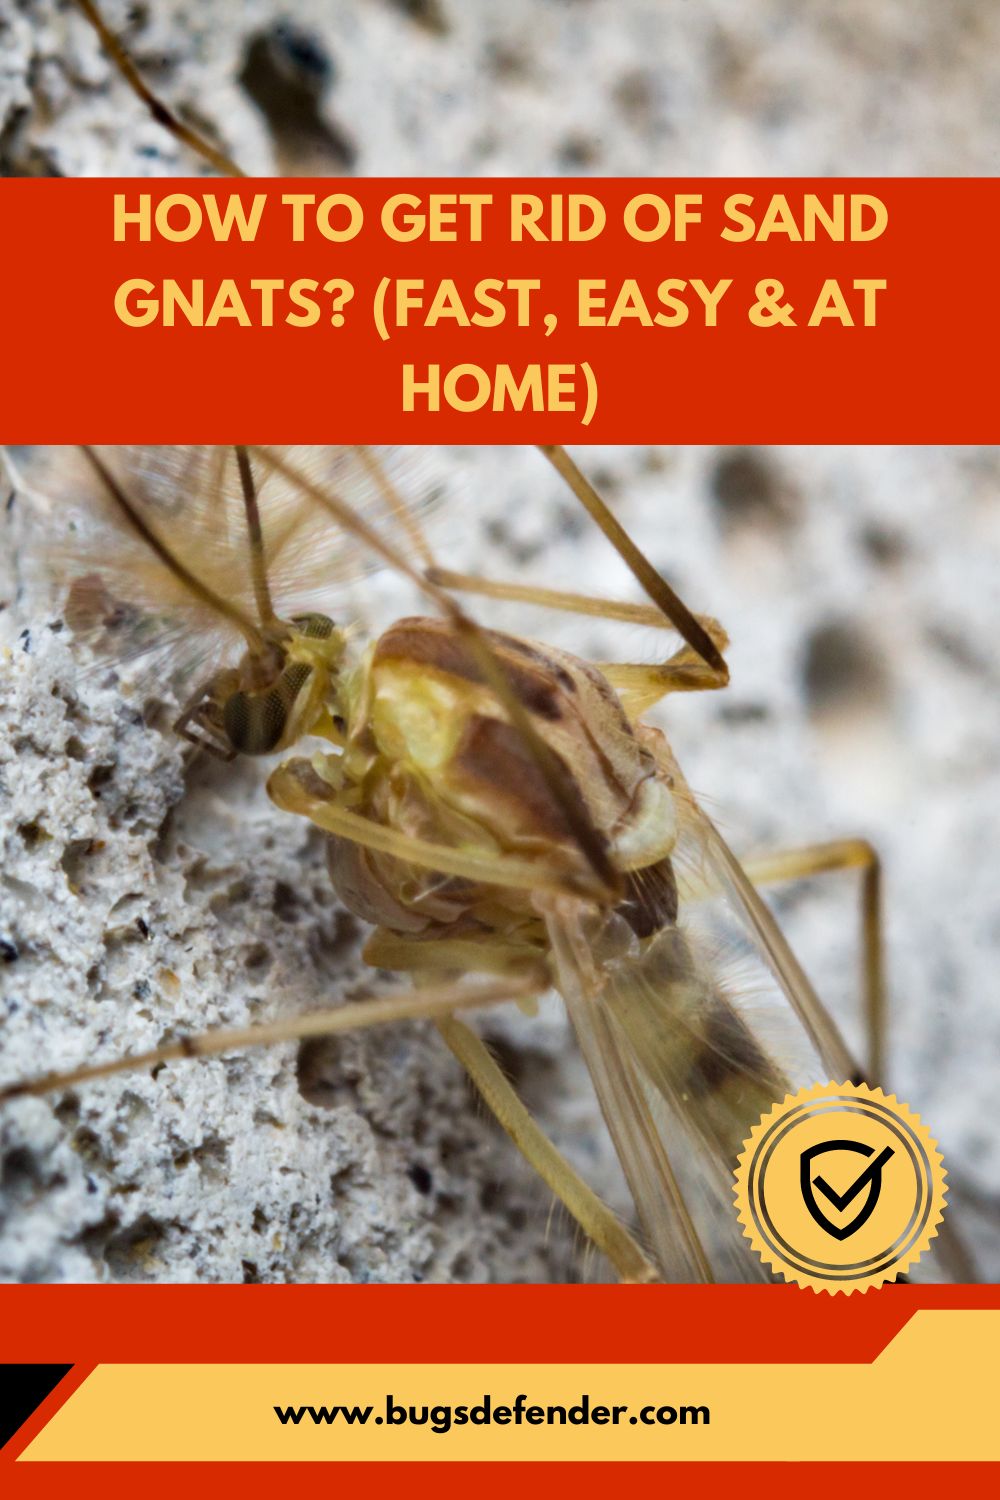 How To Get Rid Of Sand Gnats pin1